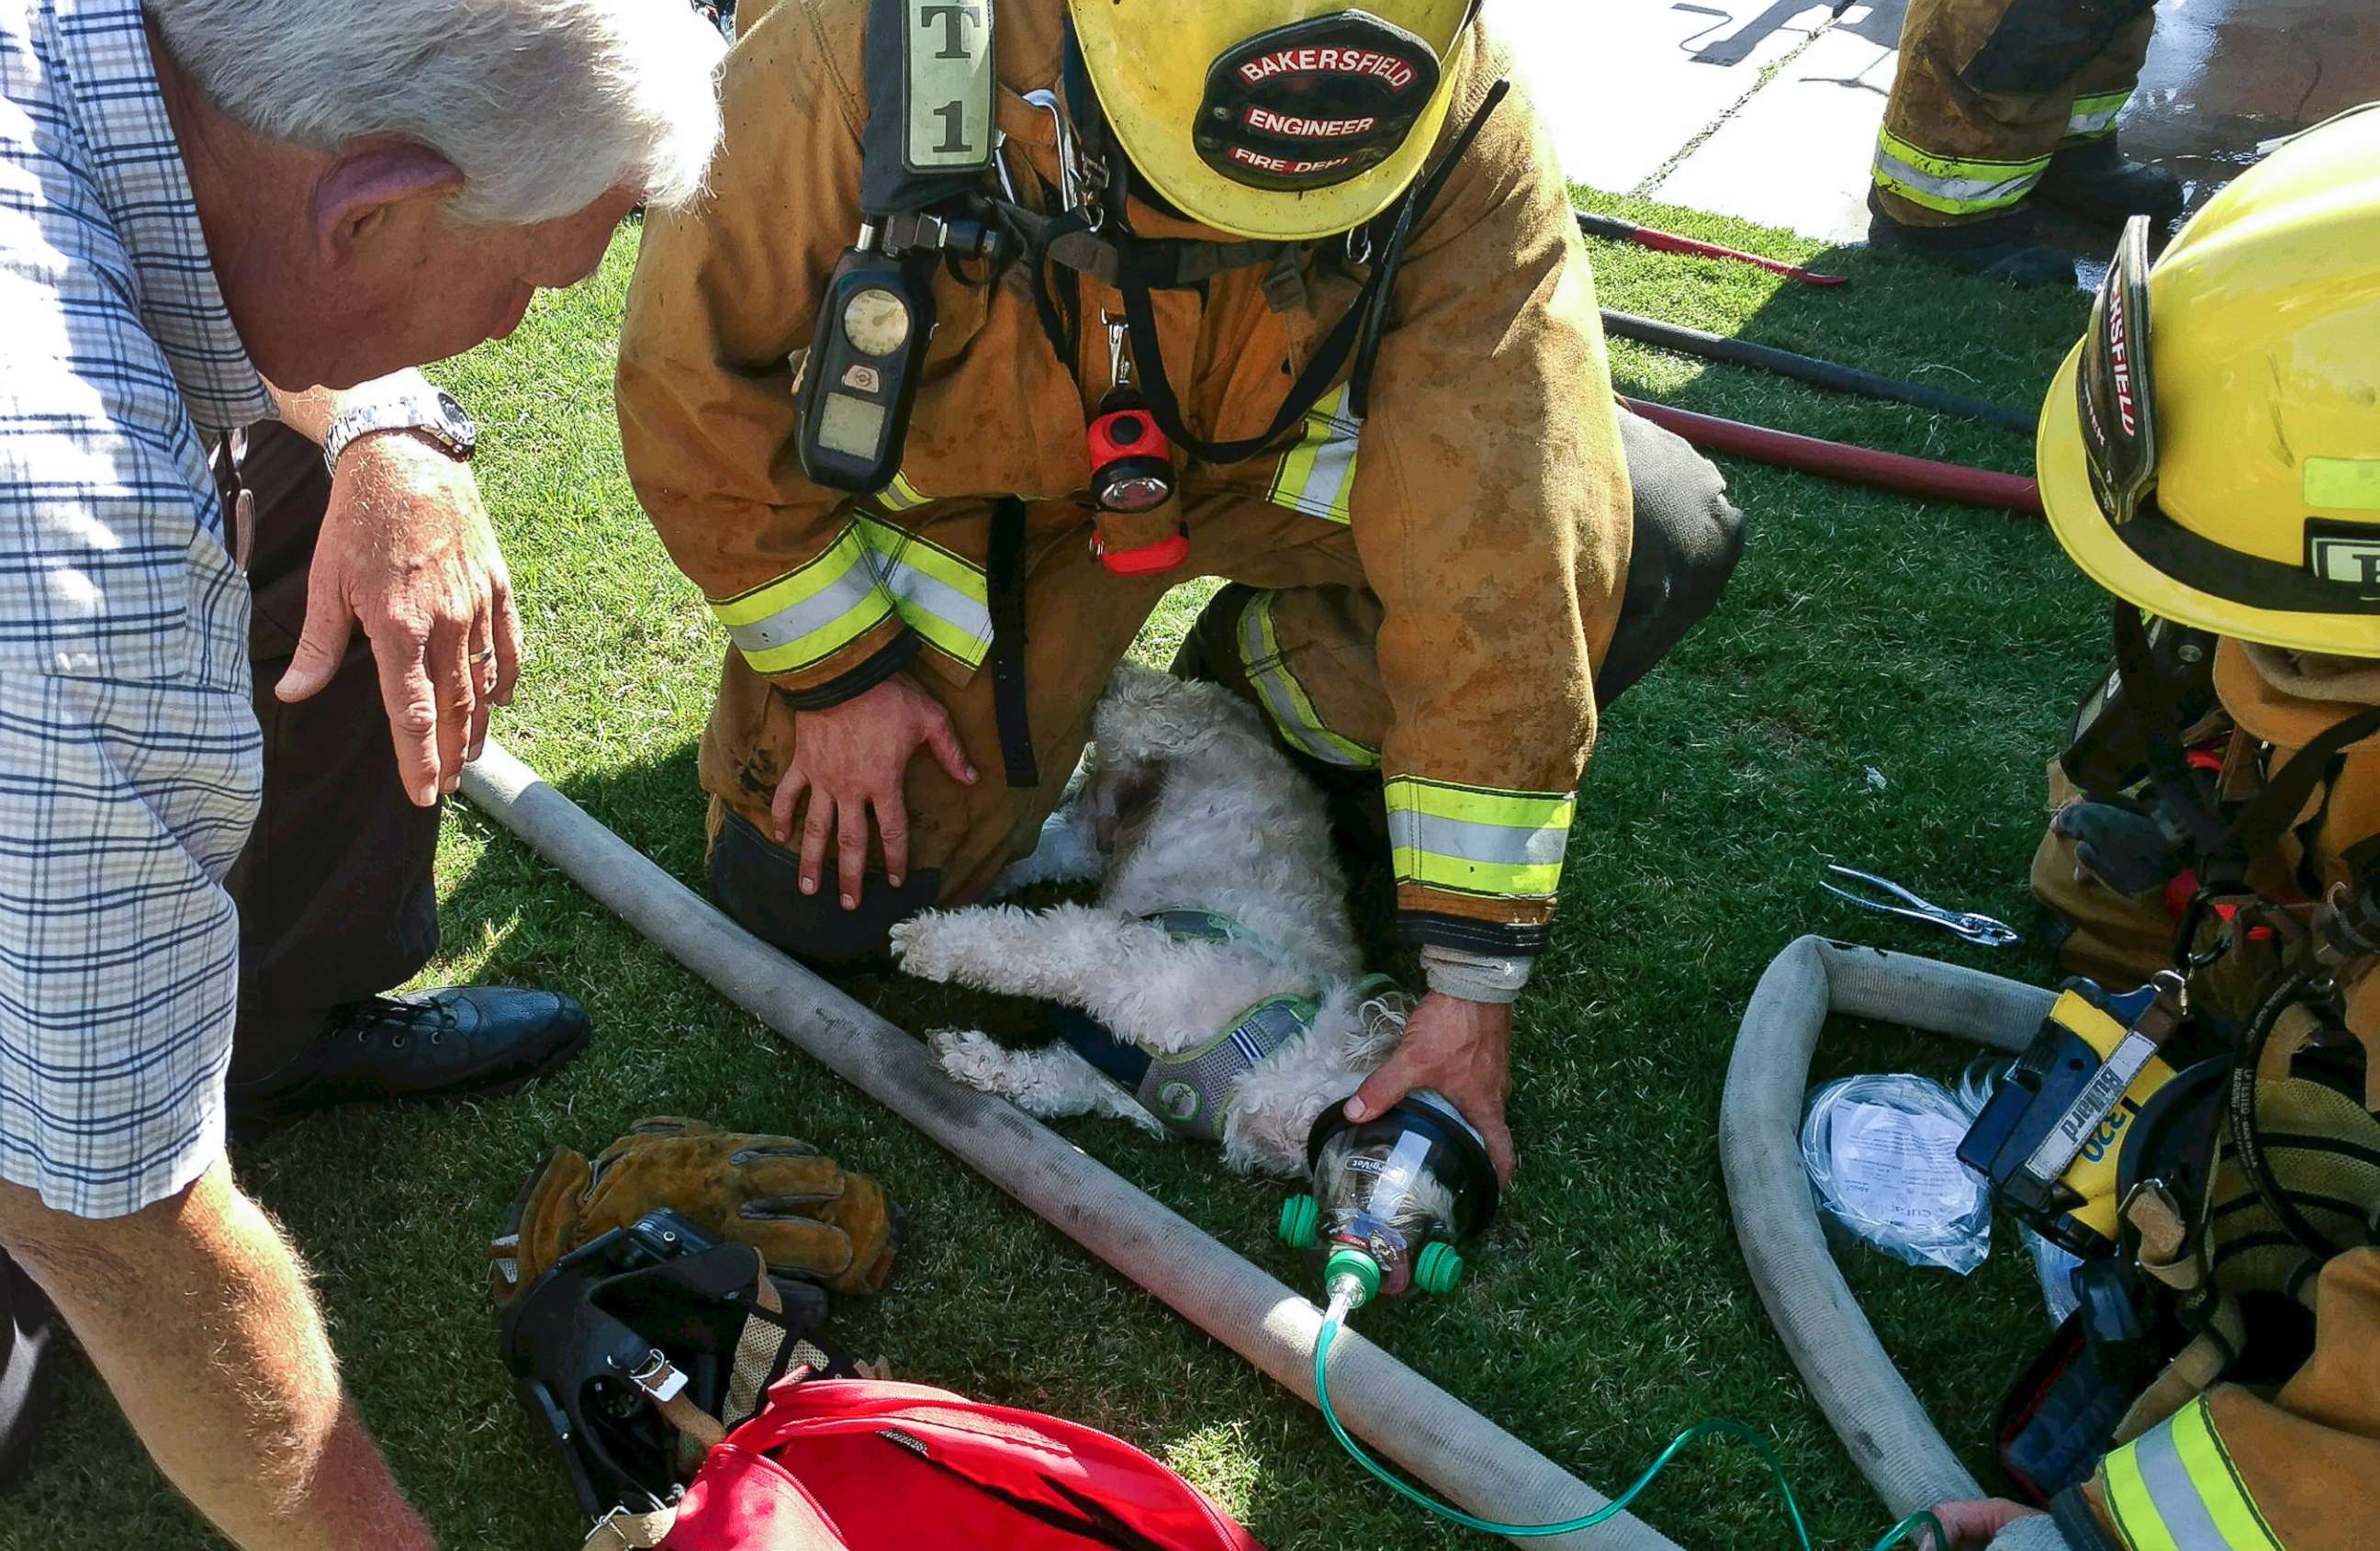 PHOTO: Firefighters provide oxygen to a small dog named "Jack" after pulling him from a burning home on July 19, 2017 in Bakersfield, Calif.